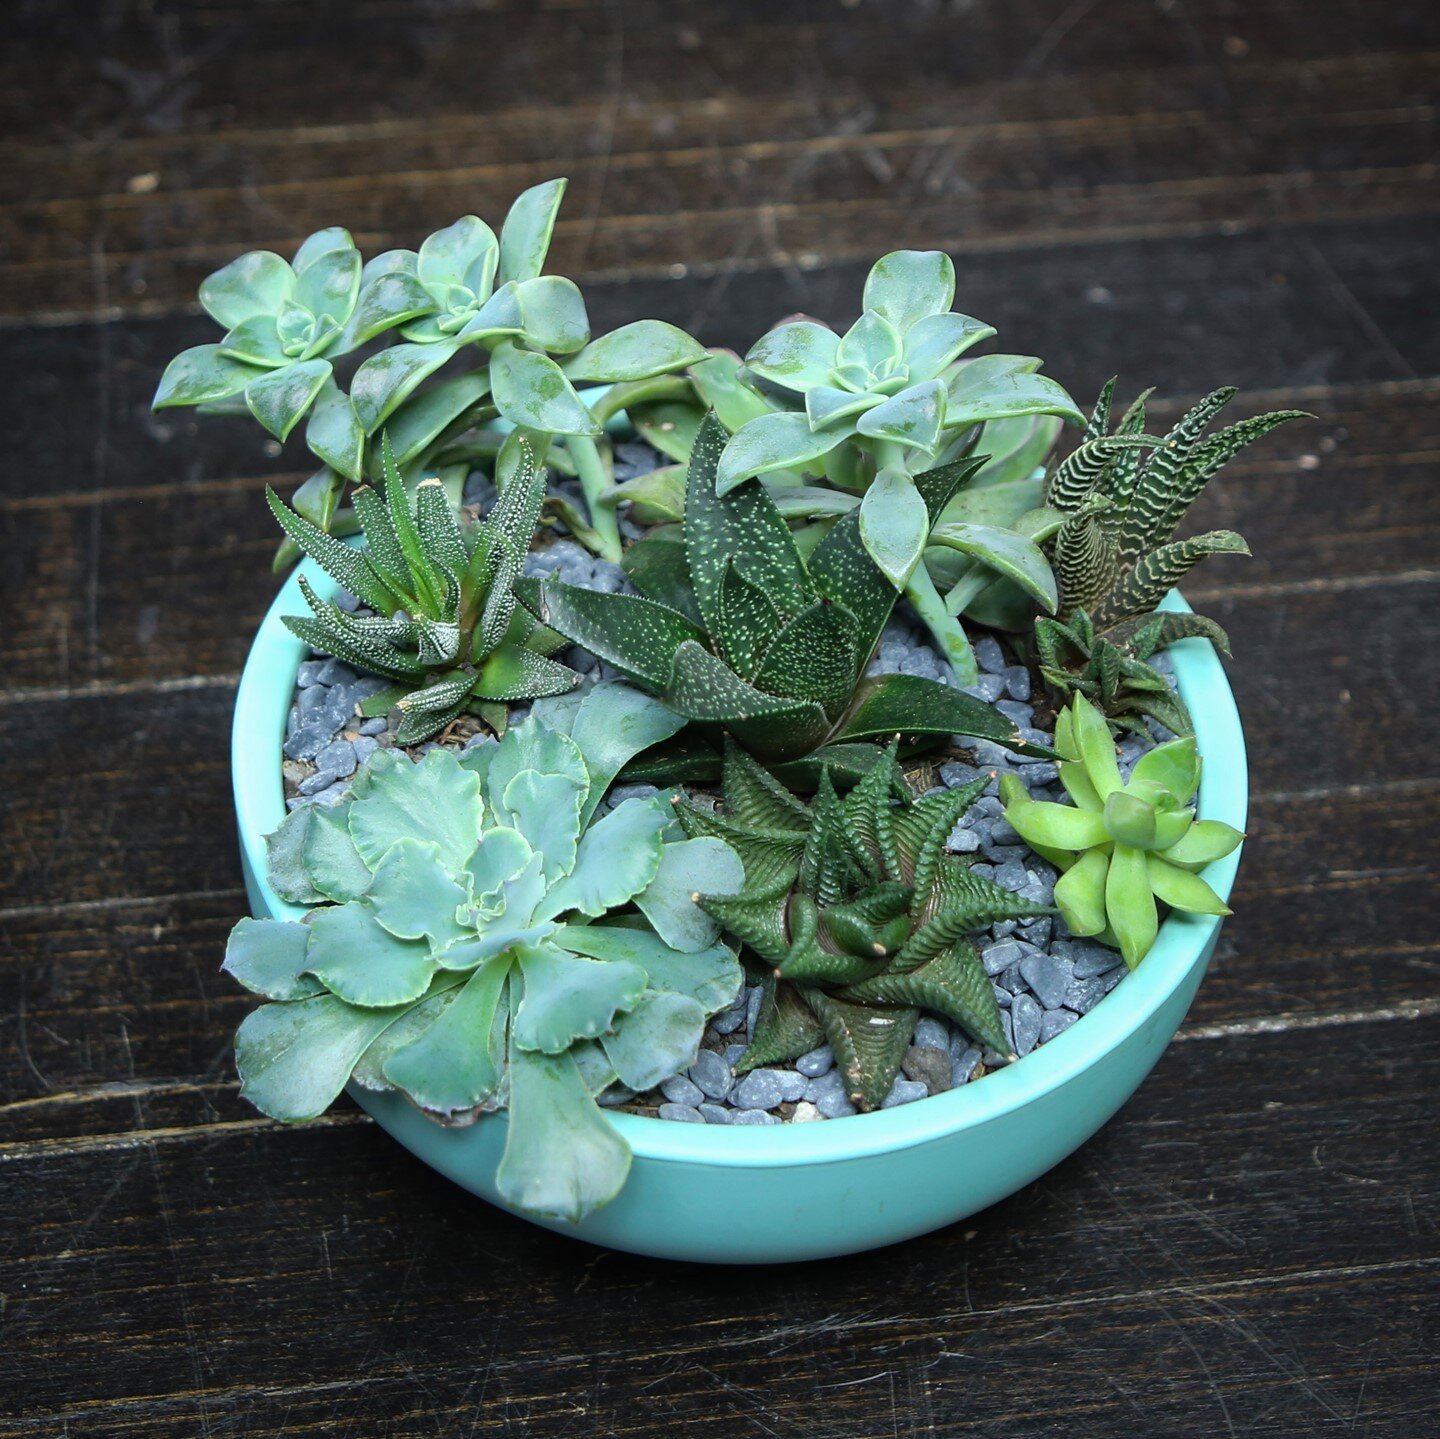 Succulent arrangements are super customizable and can be tailored to fit your specific aesthetic and design requirements. Come by the shop to check out this pre-planted arrangement or discuss a custom one in person!